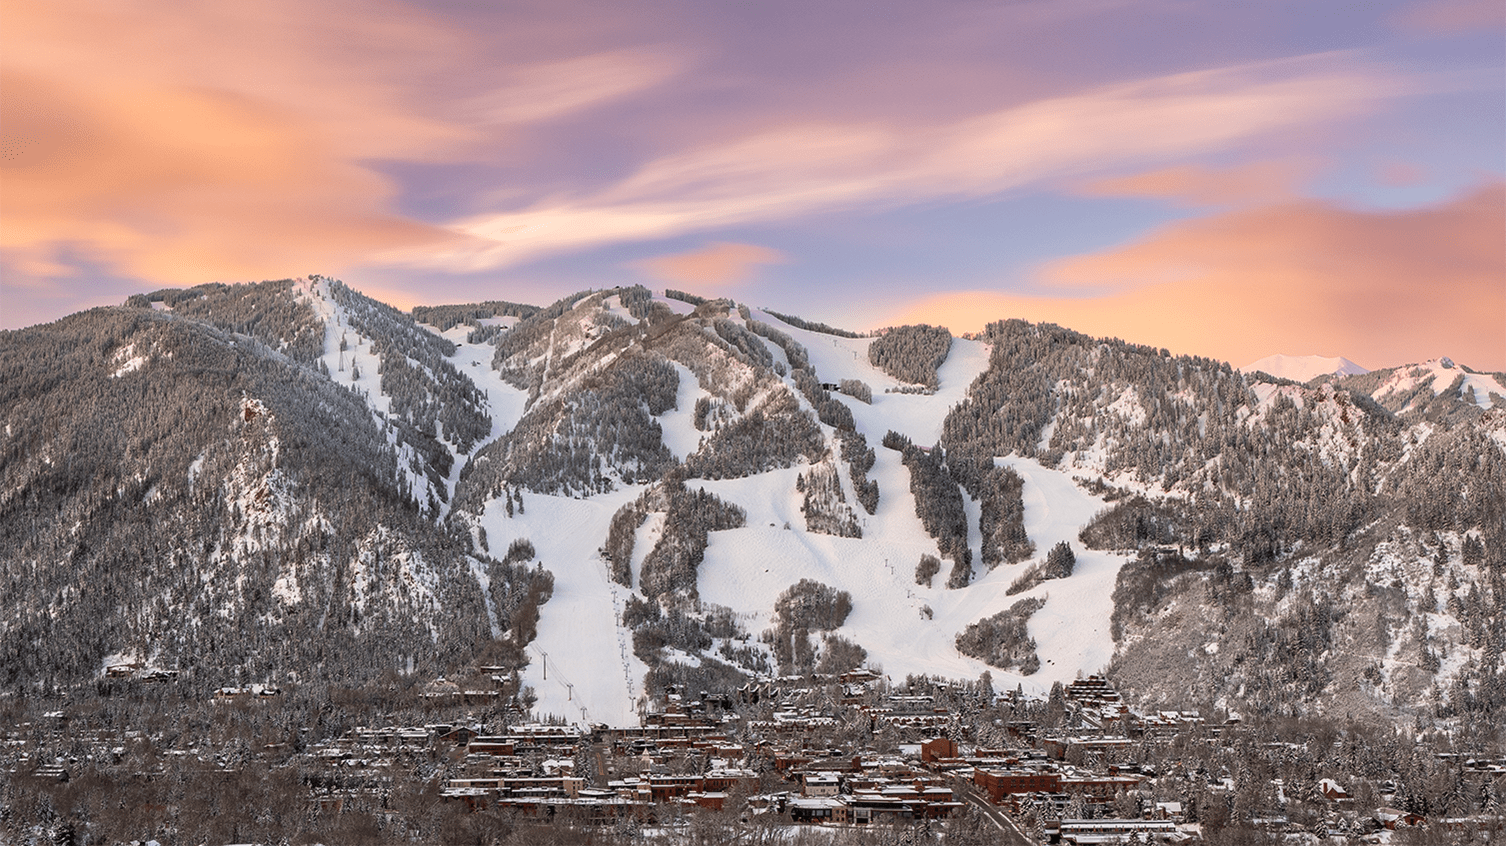 Pink and purple sky over Aspen Mountain and the town on a winter day